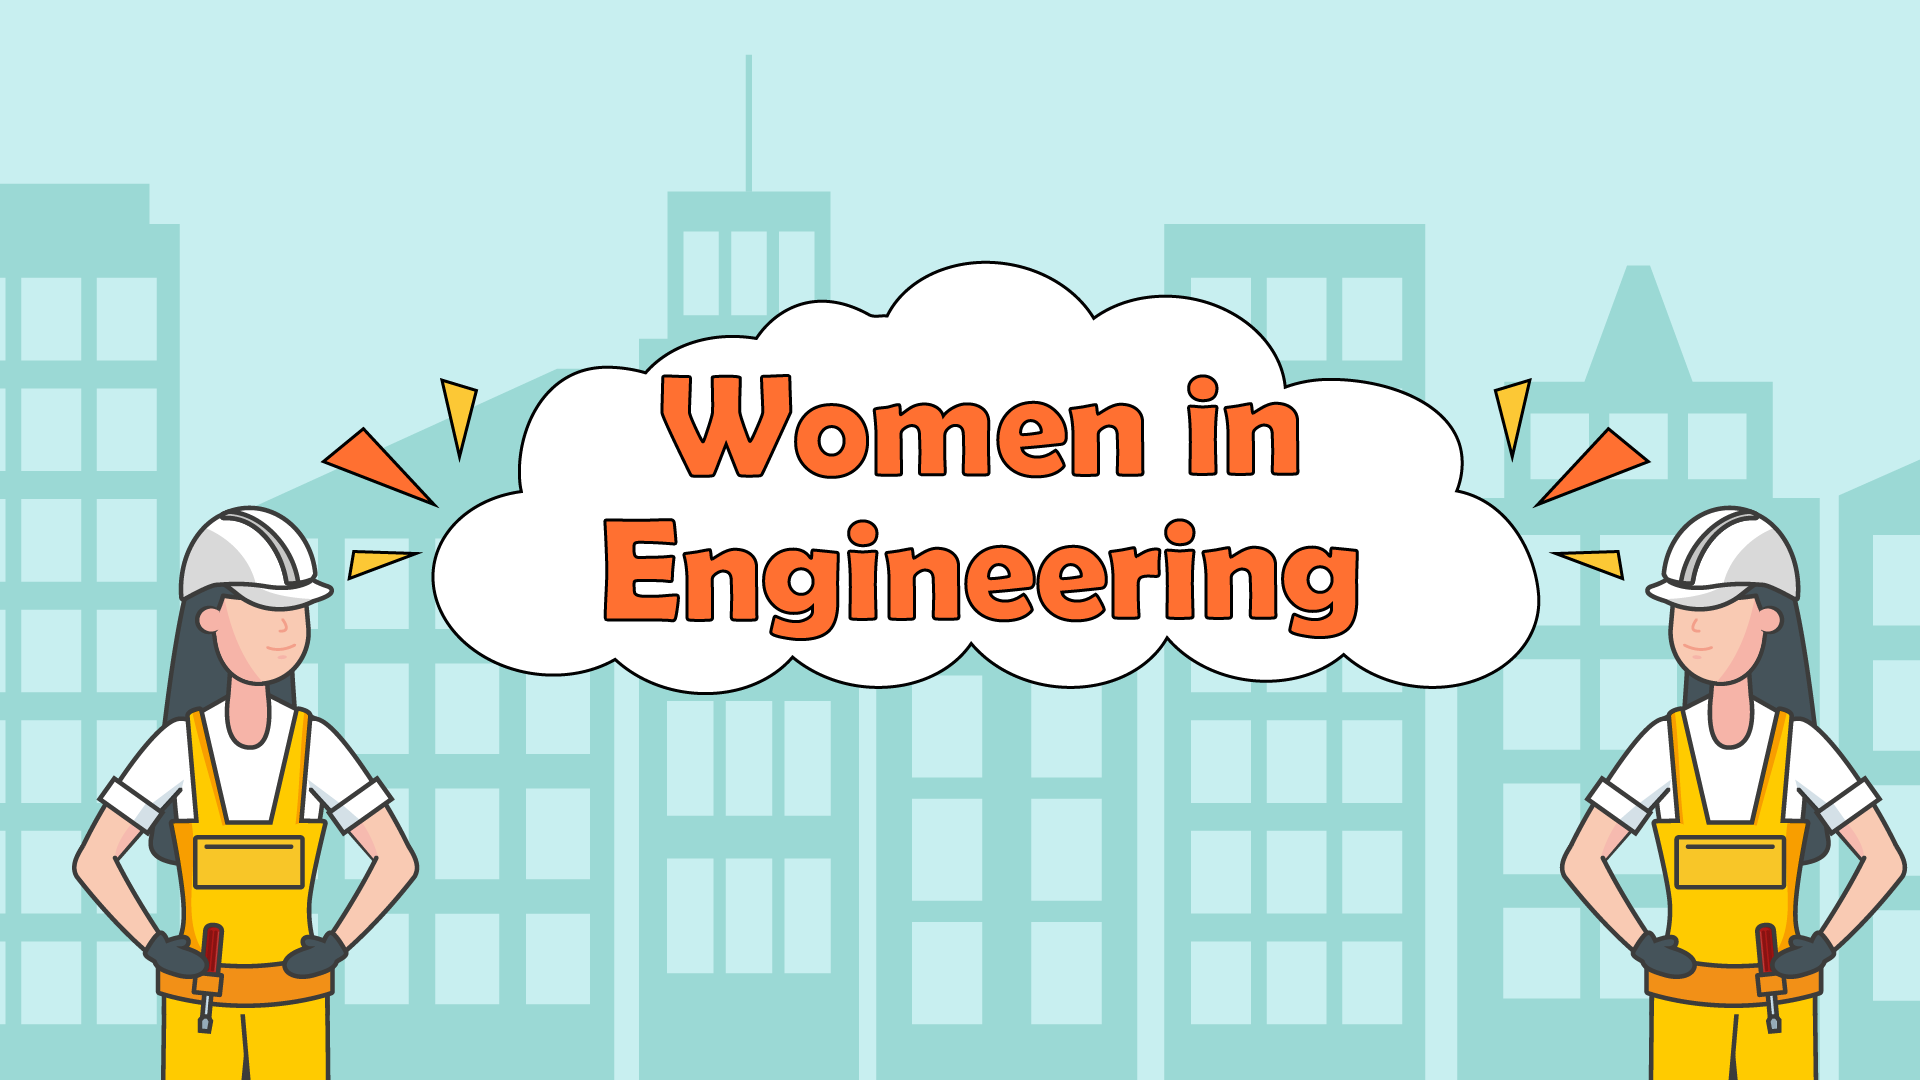 Women in Engineering: Building a More Inclusive and Innovative Future